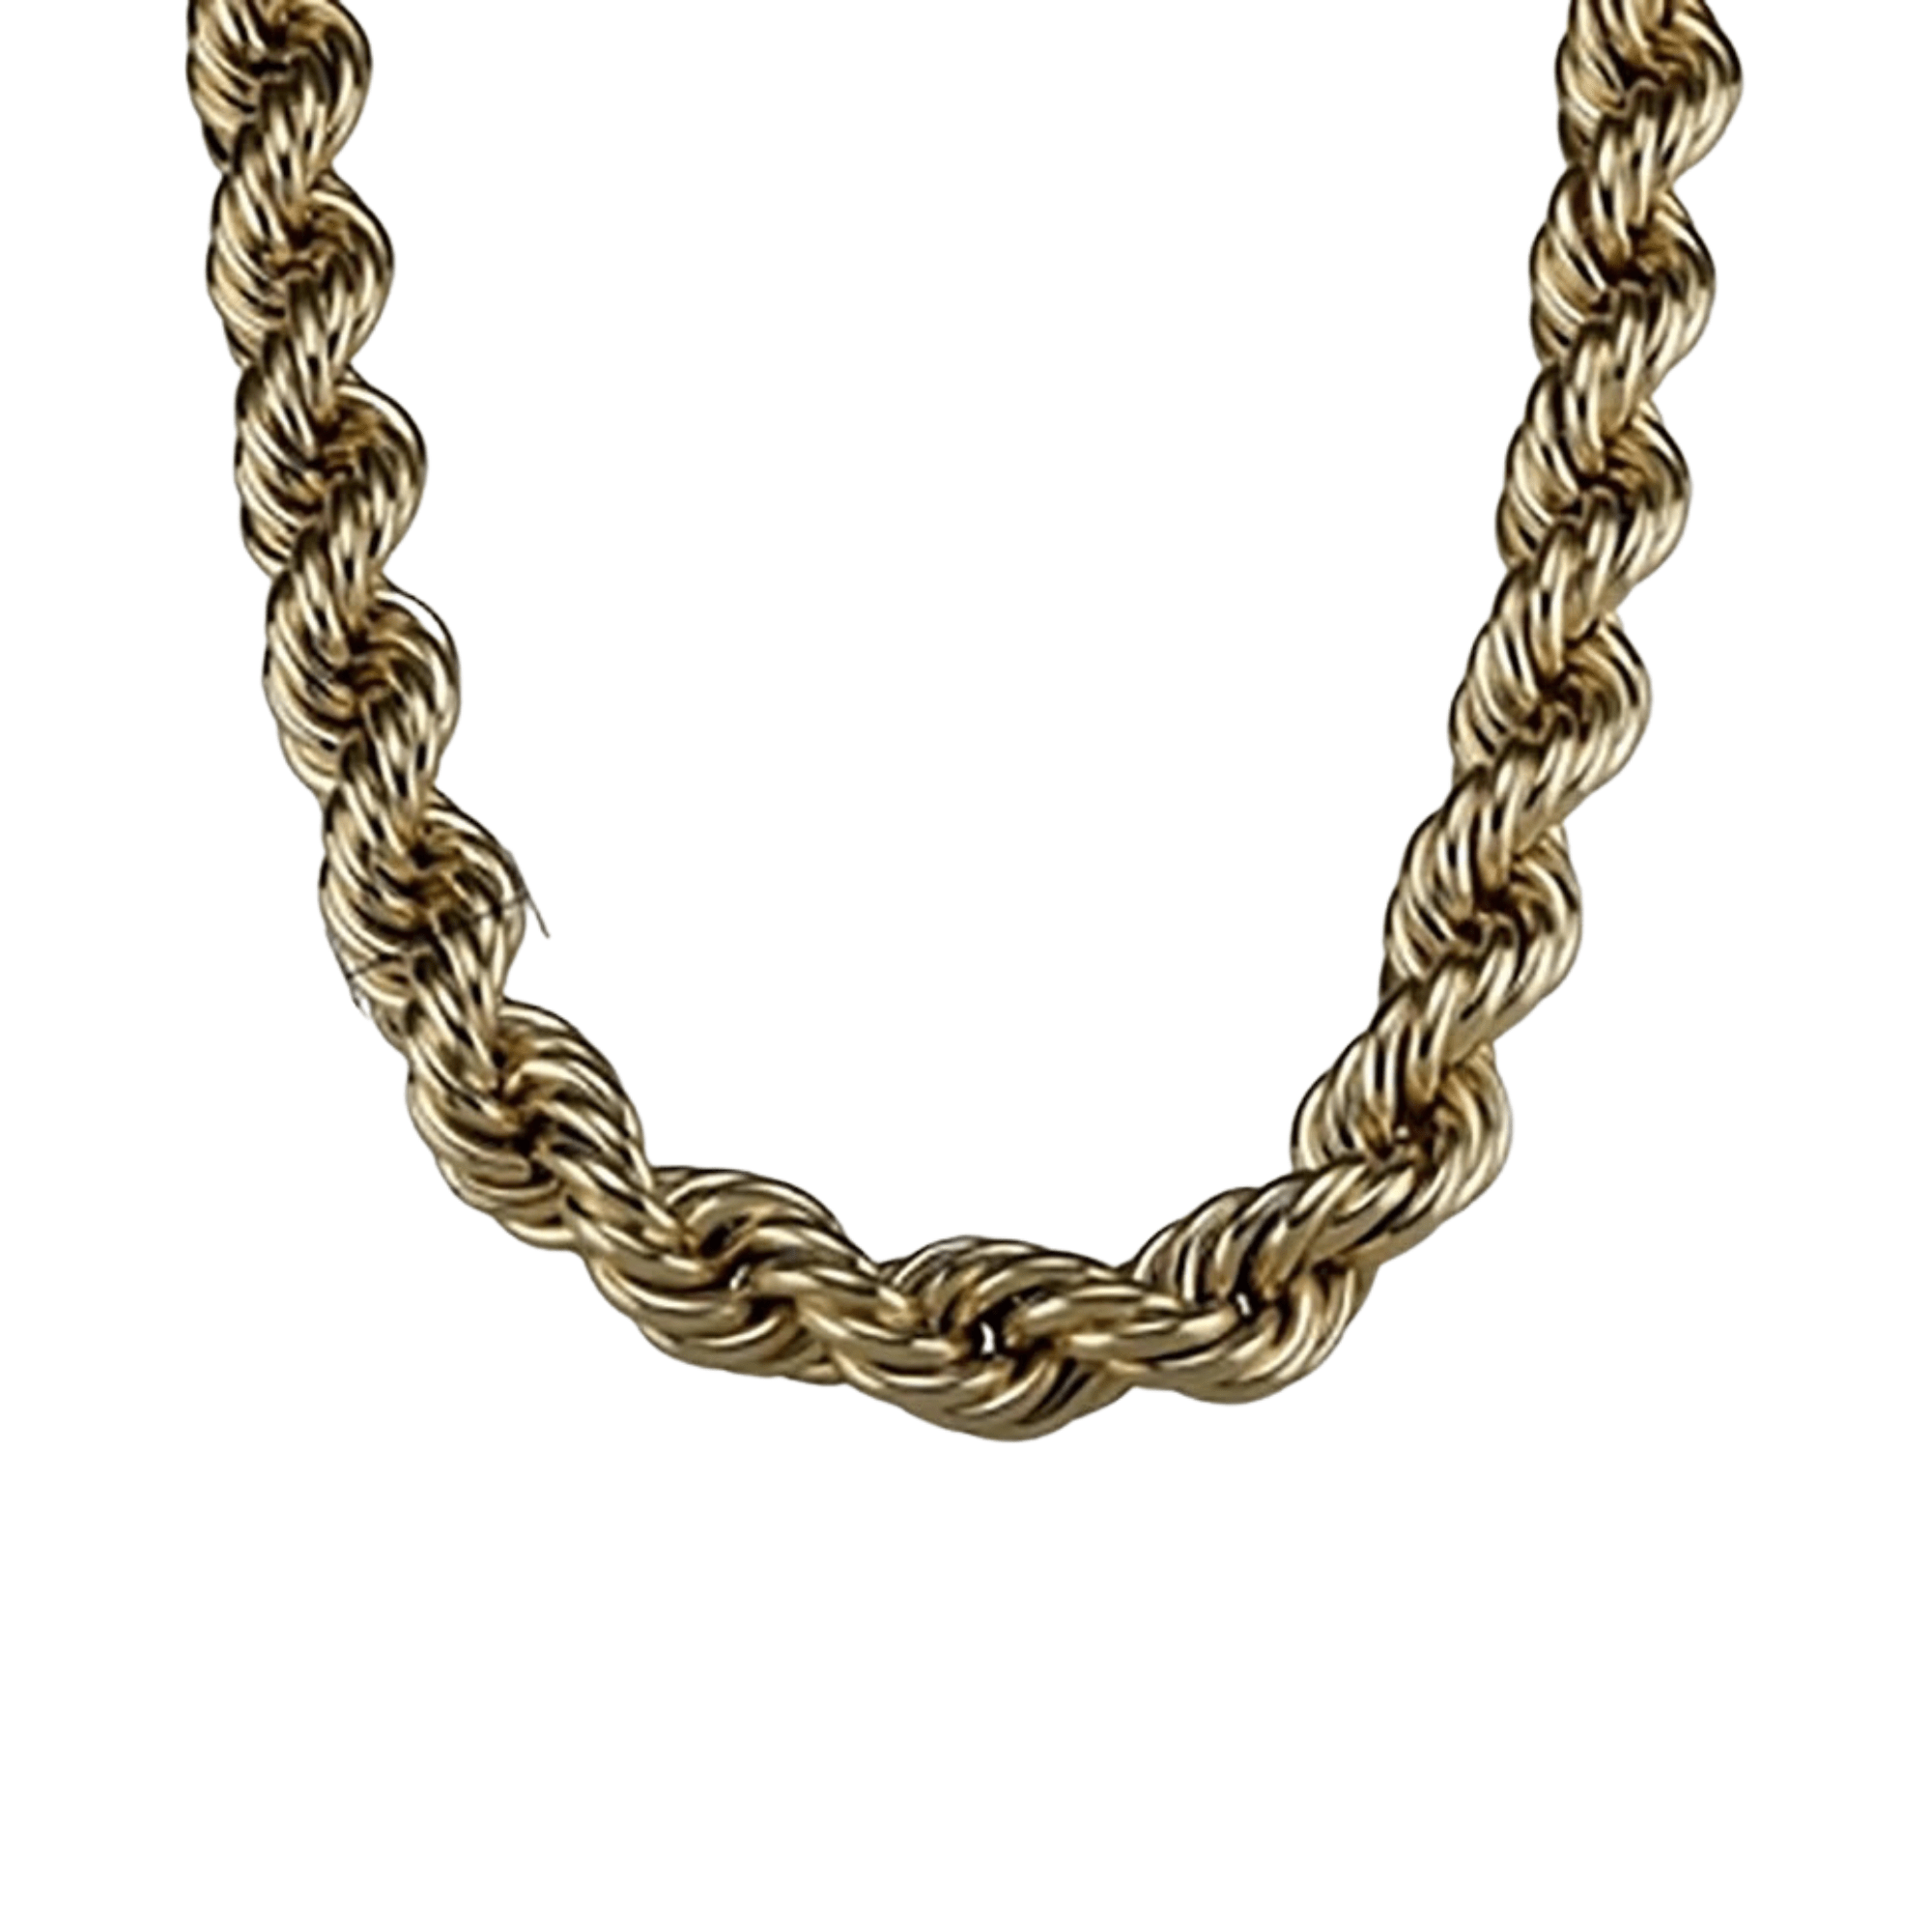 Stainless Steel Chunky Rope Necklace - Kelly Obi New York